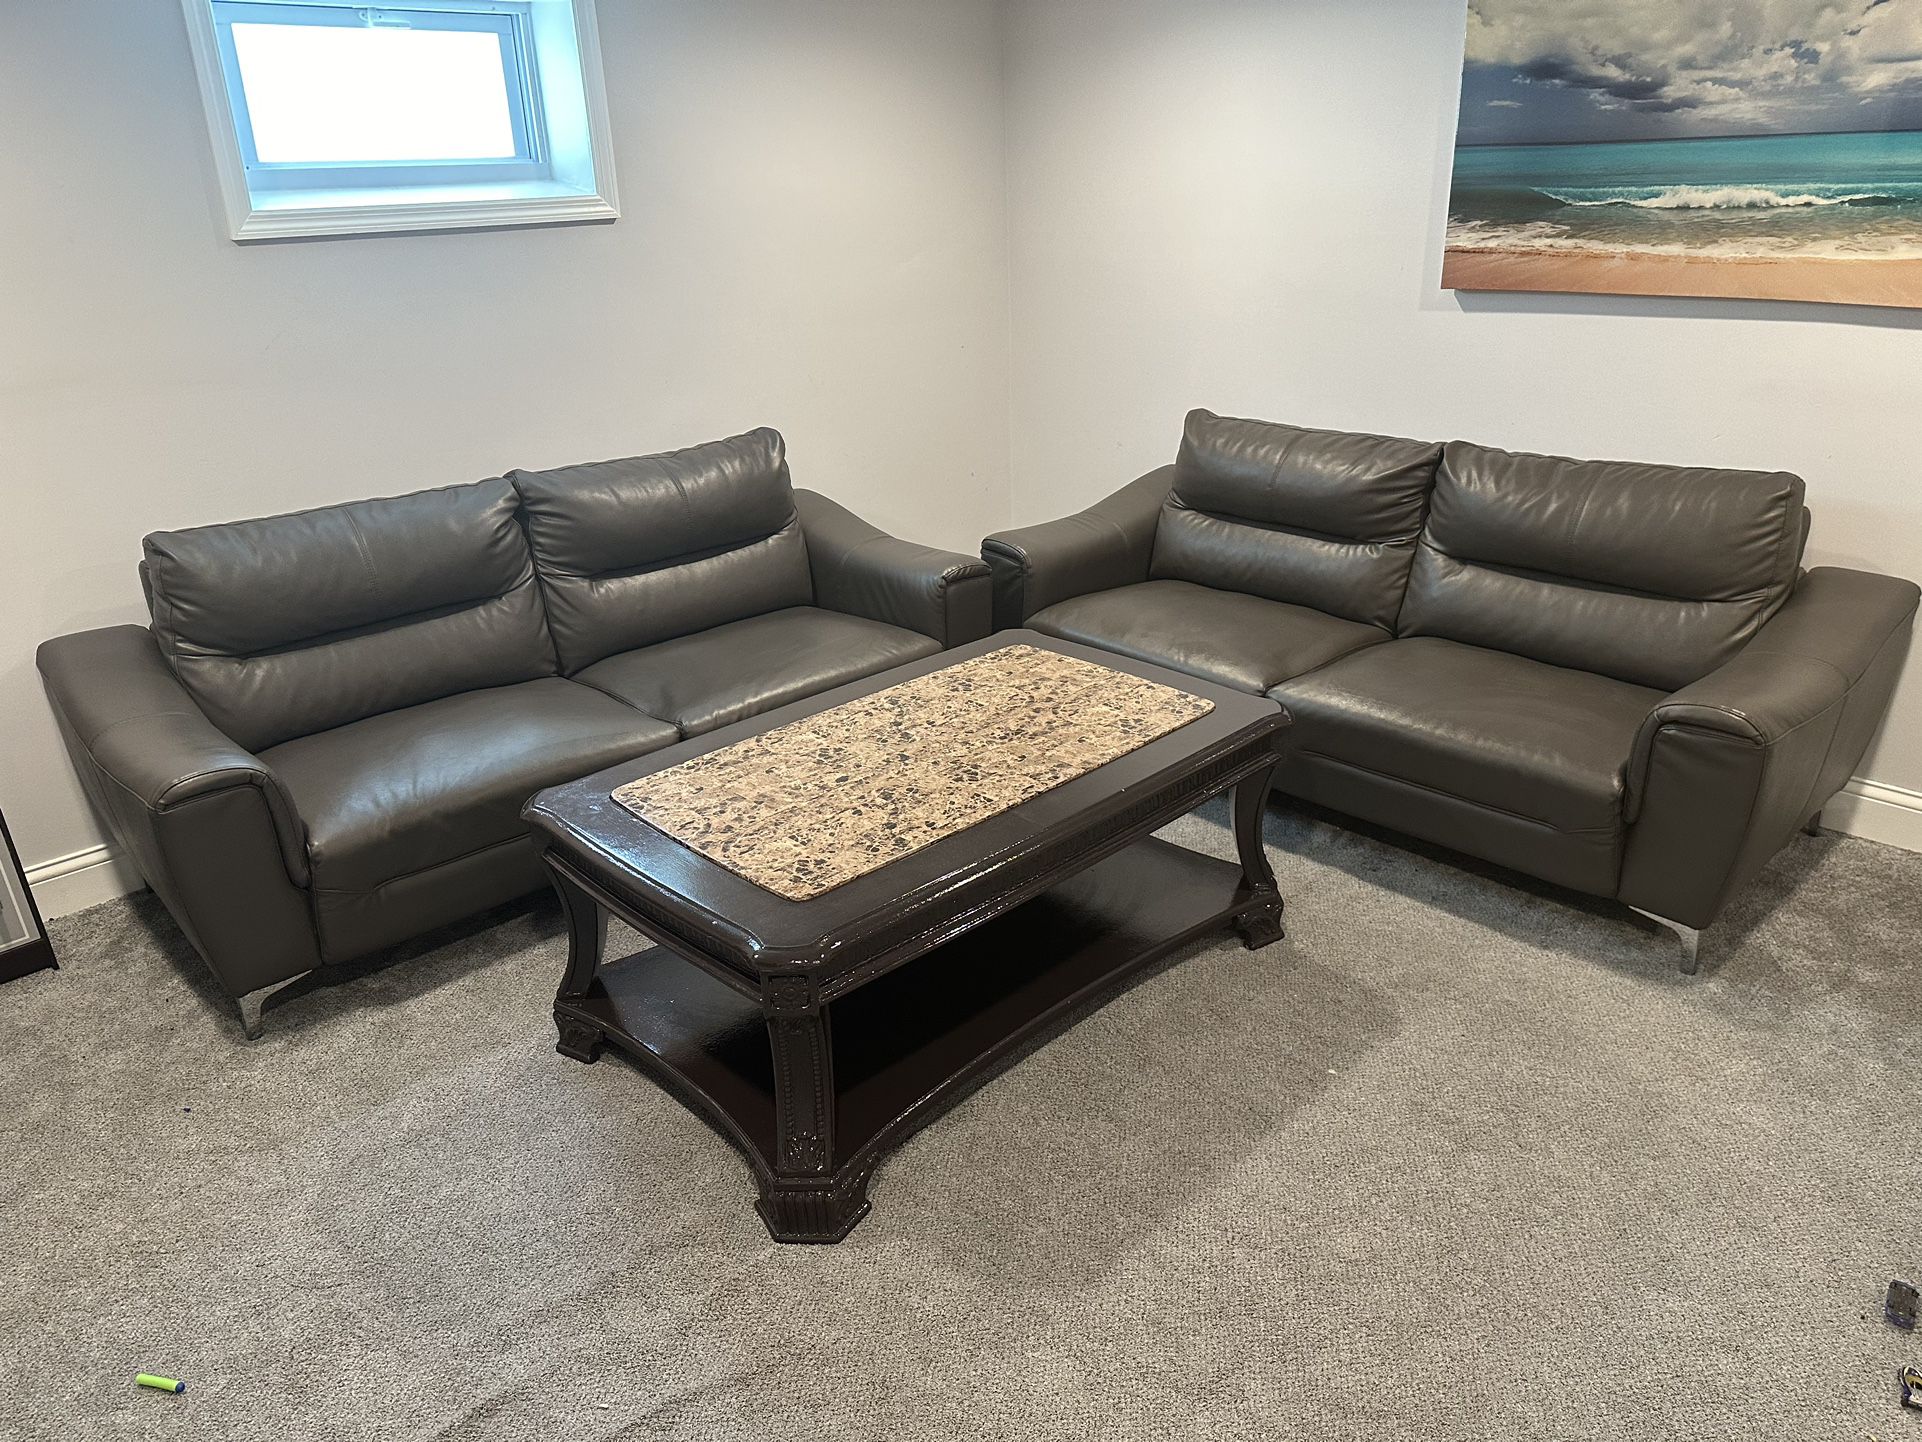 6 Seat Living Room Set With Coffee Table